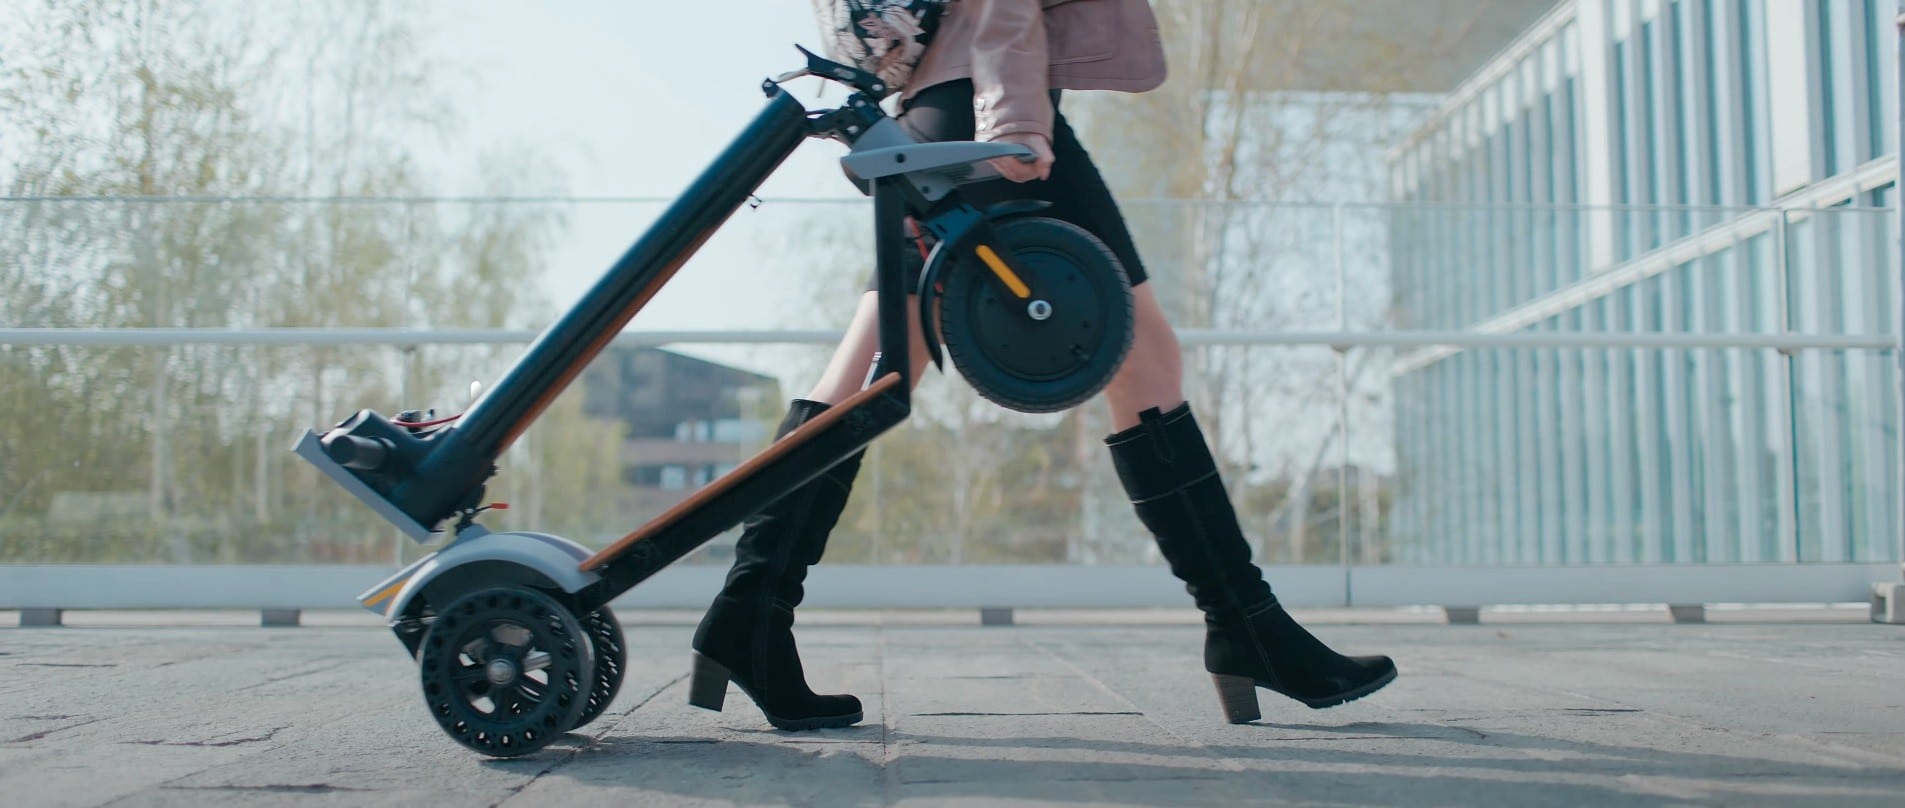 SynoTec - SynoTec vous propose une trottinette lumineuse